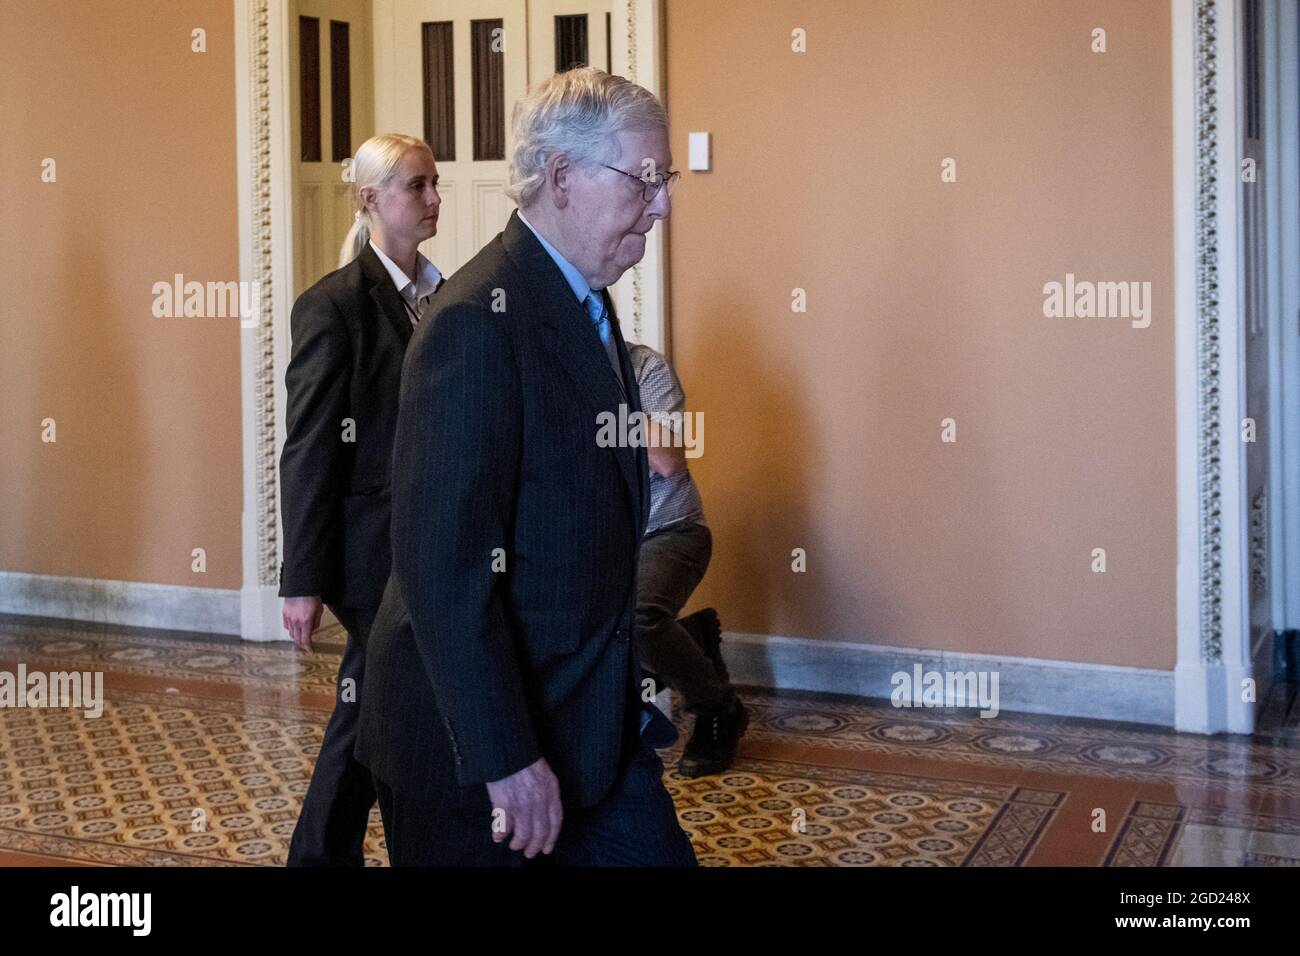 United States Senate Minority Leader Mitch McConnell (Republican of Kentucky) arrives at the US Capitol in Washington, DC, Tuesday, August 10, 2021. The Senate is expected to vote today on final passage of the bipartisan $1 trillion H.R. 3684, Infrastructure Investment and Jobs Act. Photo by Rod Lamkey / CNP/ABACAPRESS.COM Stock Photo